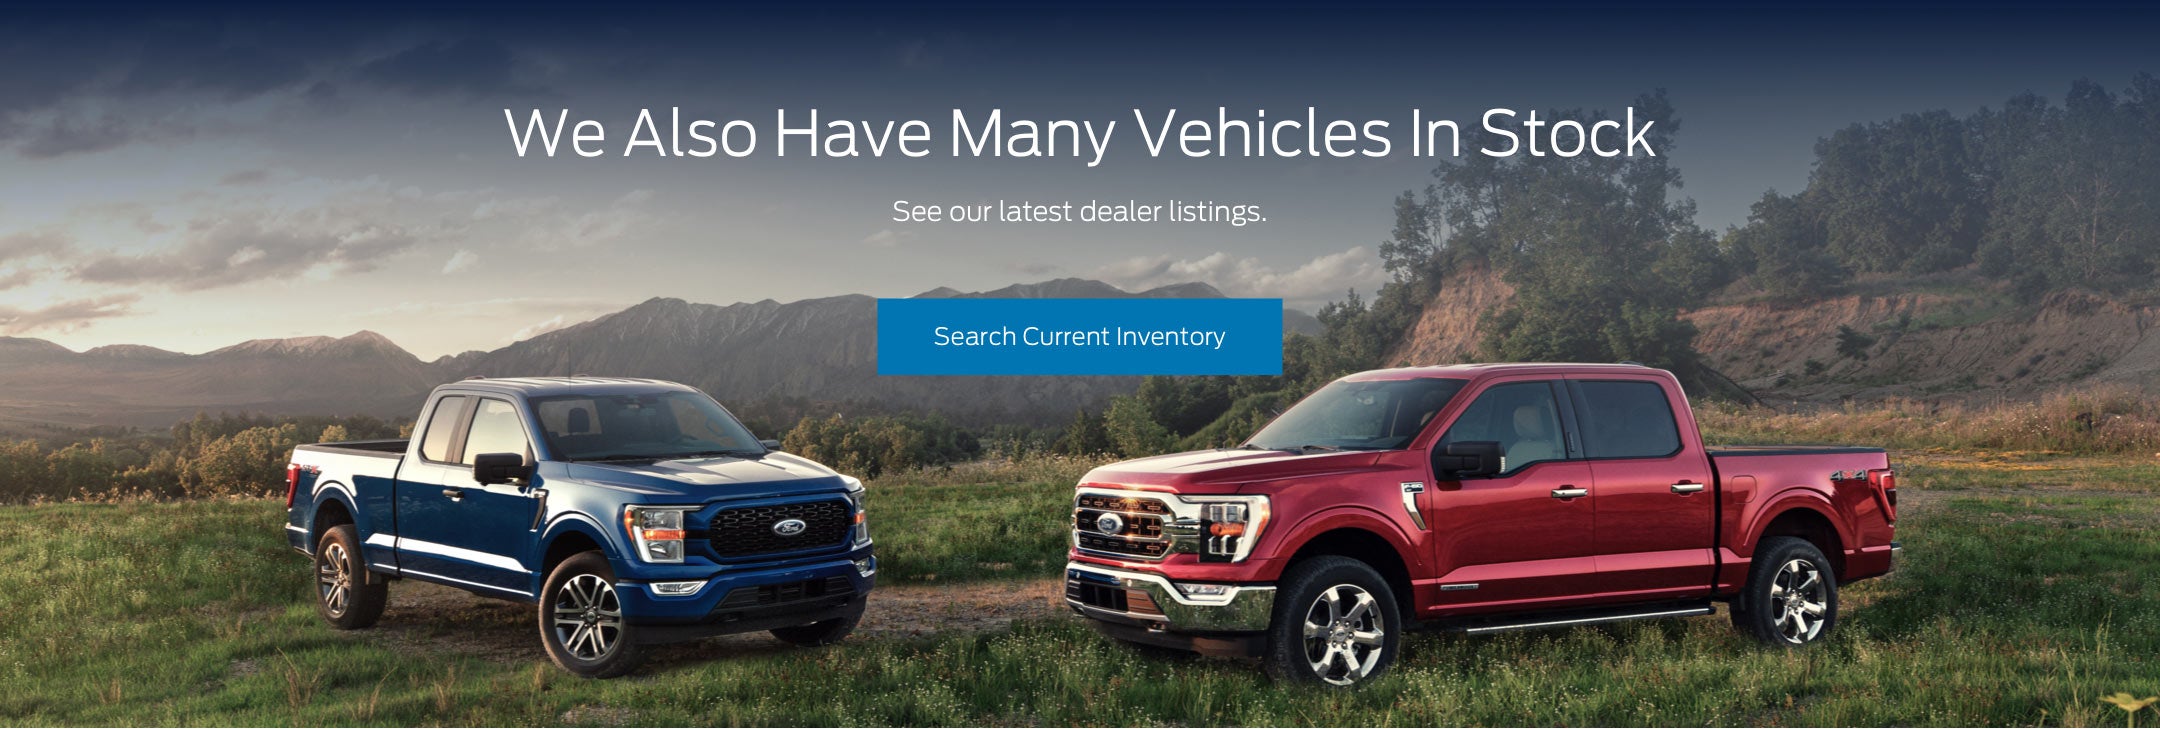 Ford vehicles in stock | Aschenbach Ford in Wytheville VA